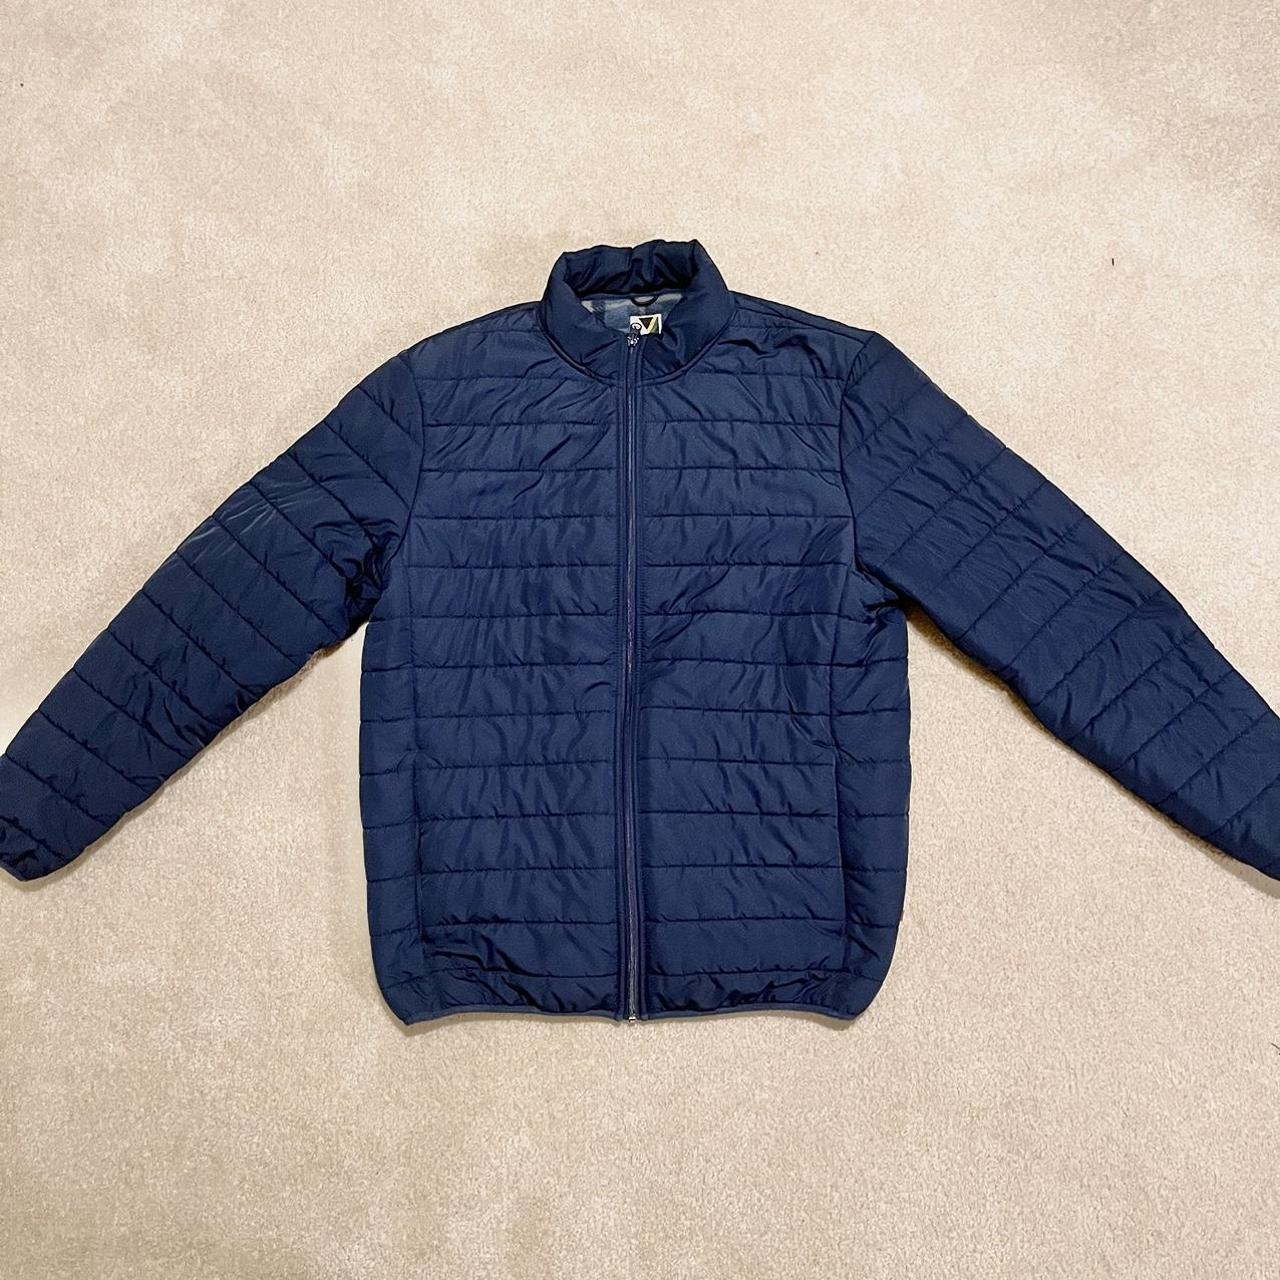 VOYAGER PUFFER JACKET | size L | blue jacket with a... - Depop